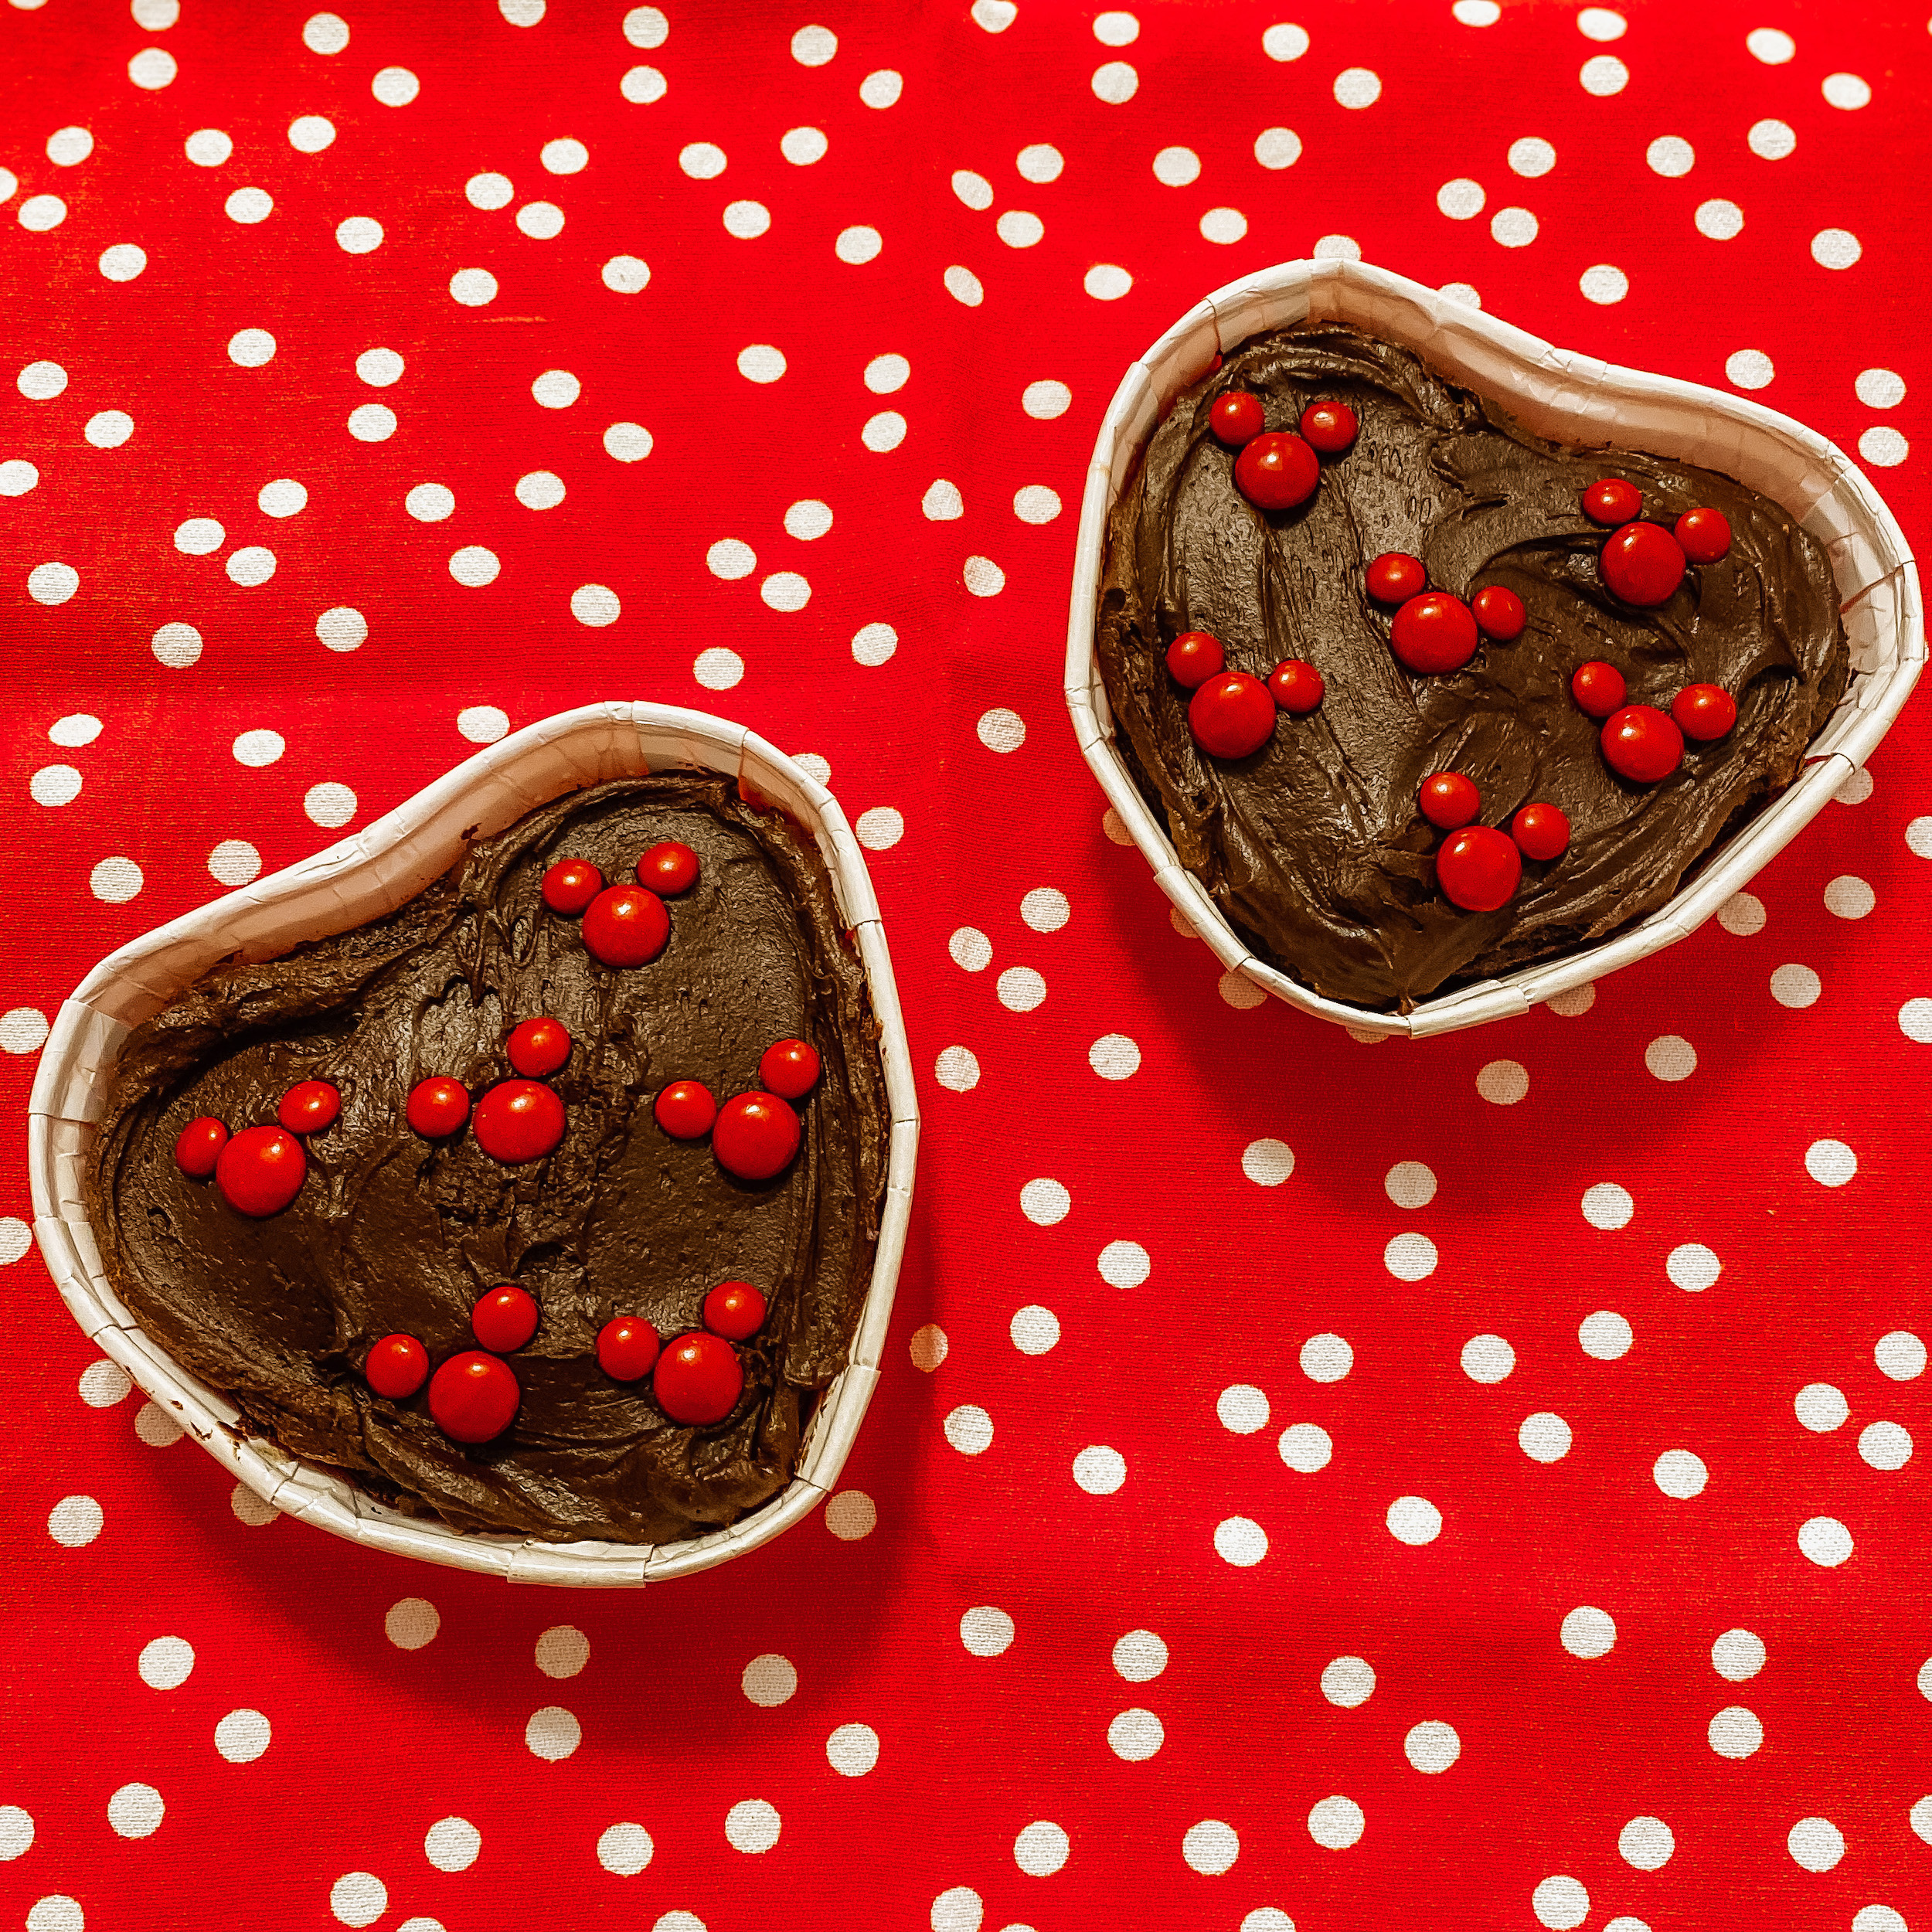 chocolate Mickey & Minnie's Sweetheat Brownies with red mickey shaped m&ms on a red and white polka dot background.